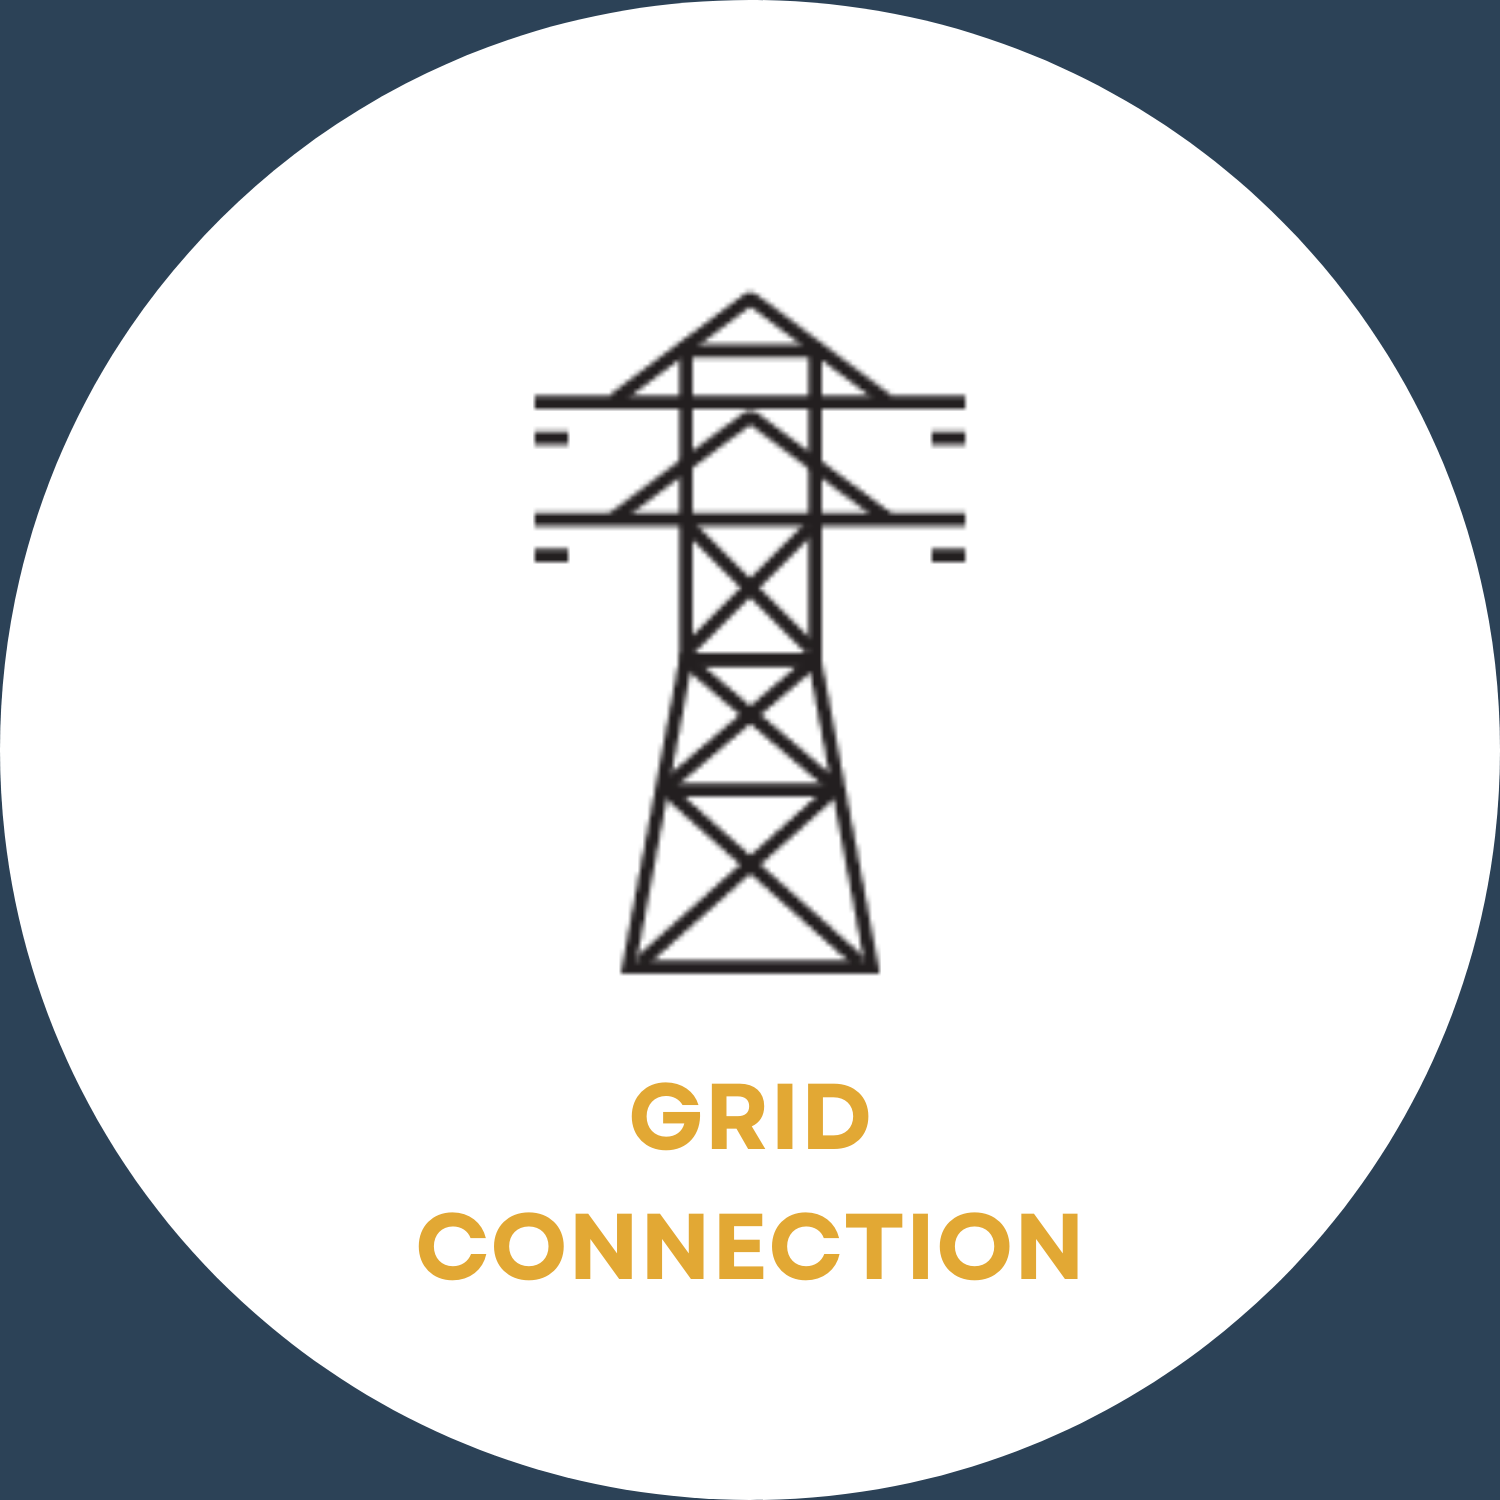 Grid connection